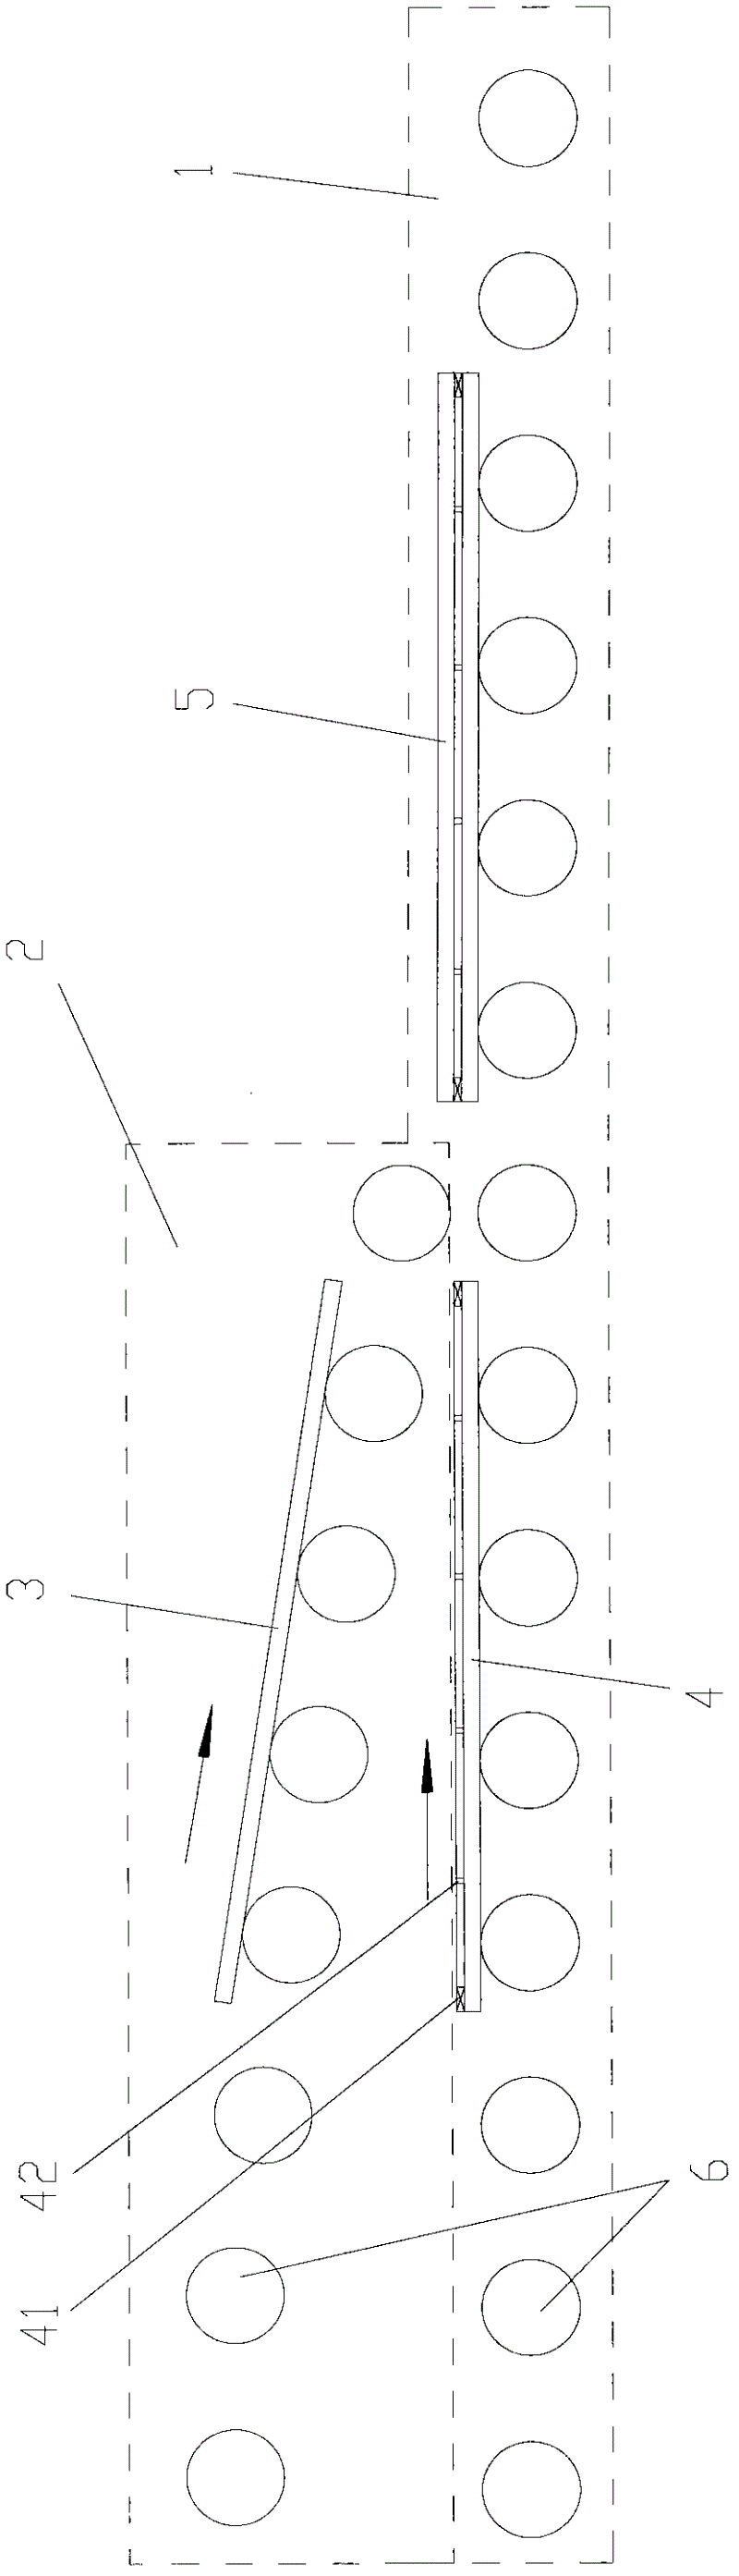 Glass plate combining apparatus used for making multilayer structure glass member